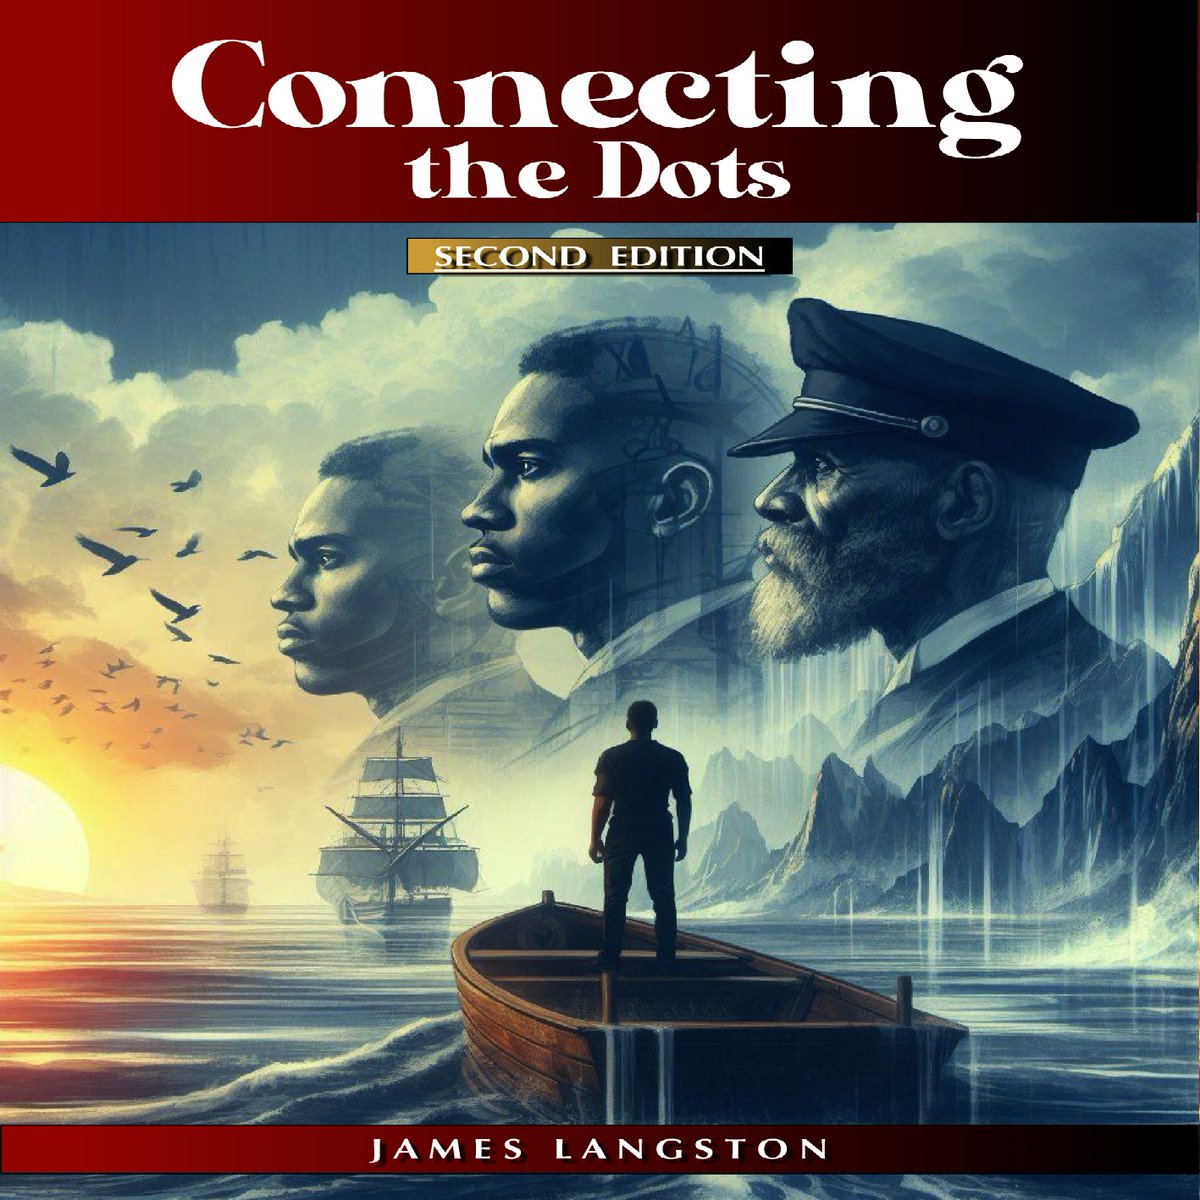 Excited to announce that 'Connecting the Dots' [zurl.co/NeE4] by James Langston is now on Kindle as an eBook! 📚 Discover how even the slightest missed connection can shape your present and future. Don't miss out! #Connecting #LifeMatters #KindleBook @wemby